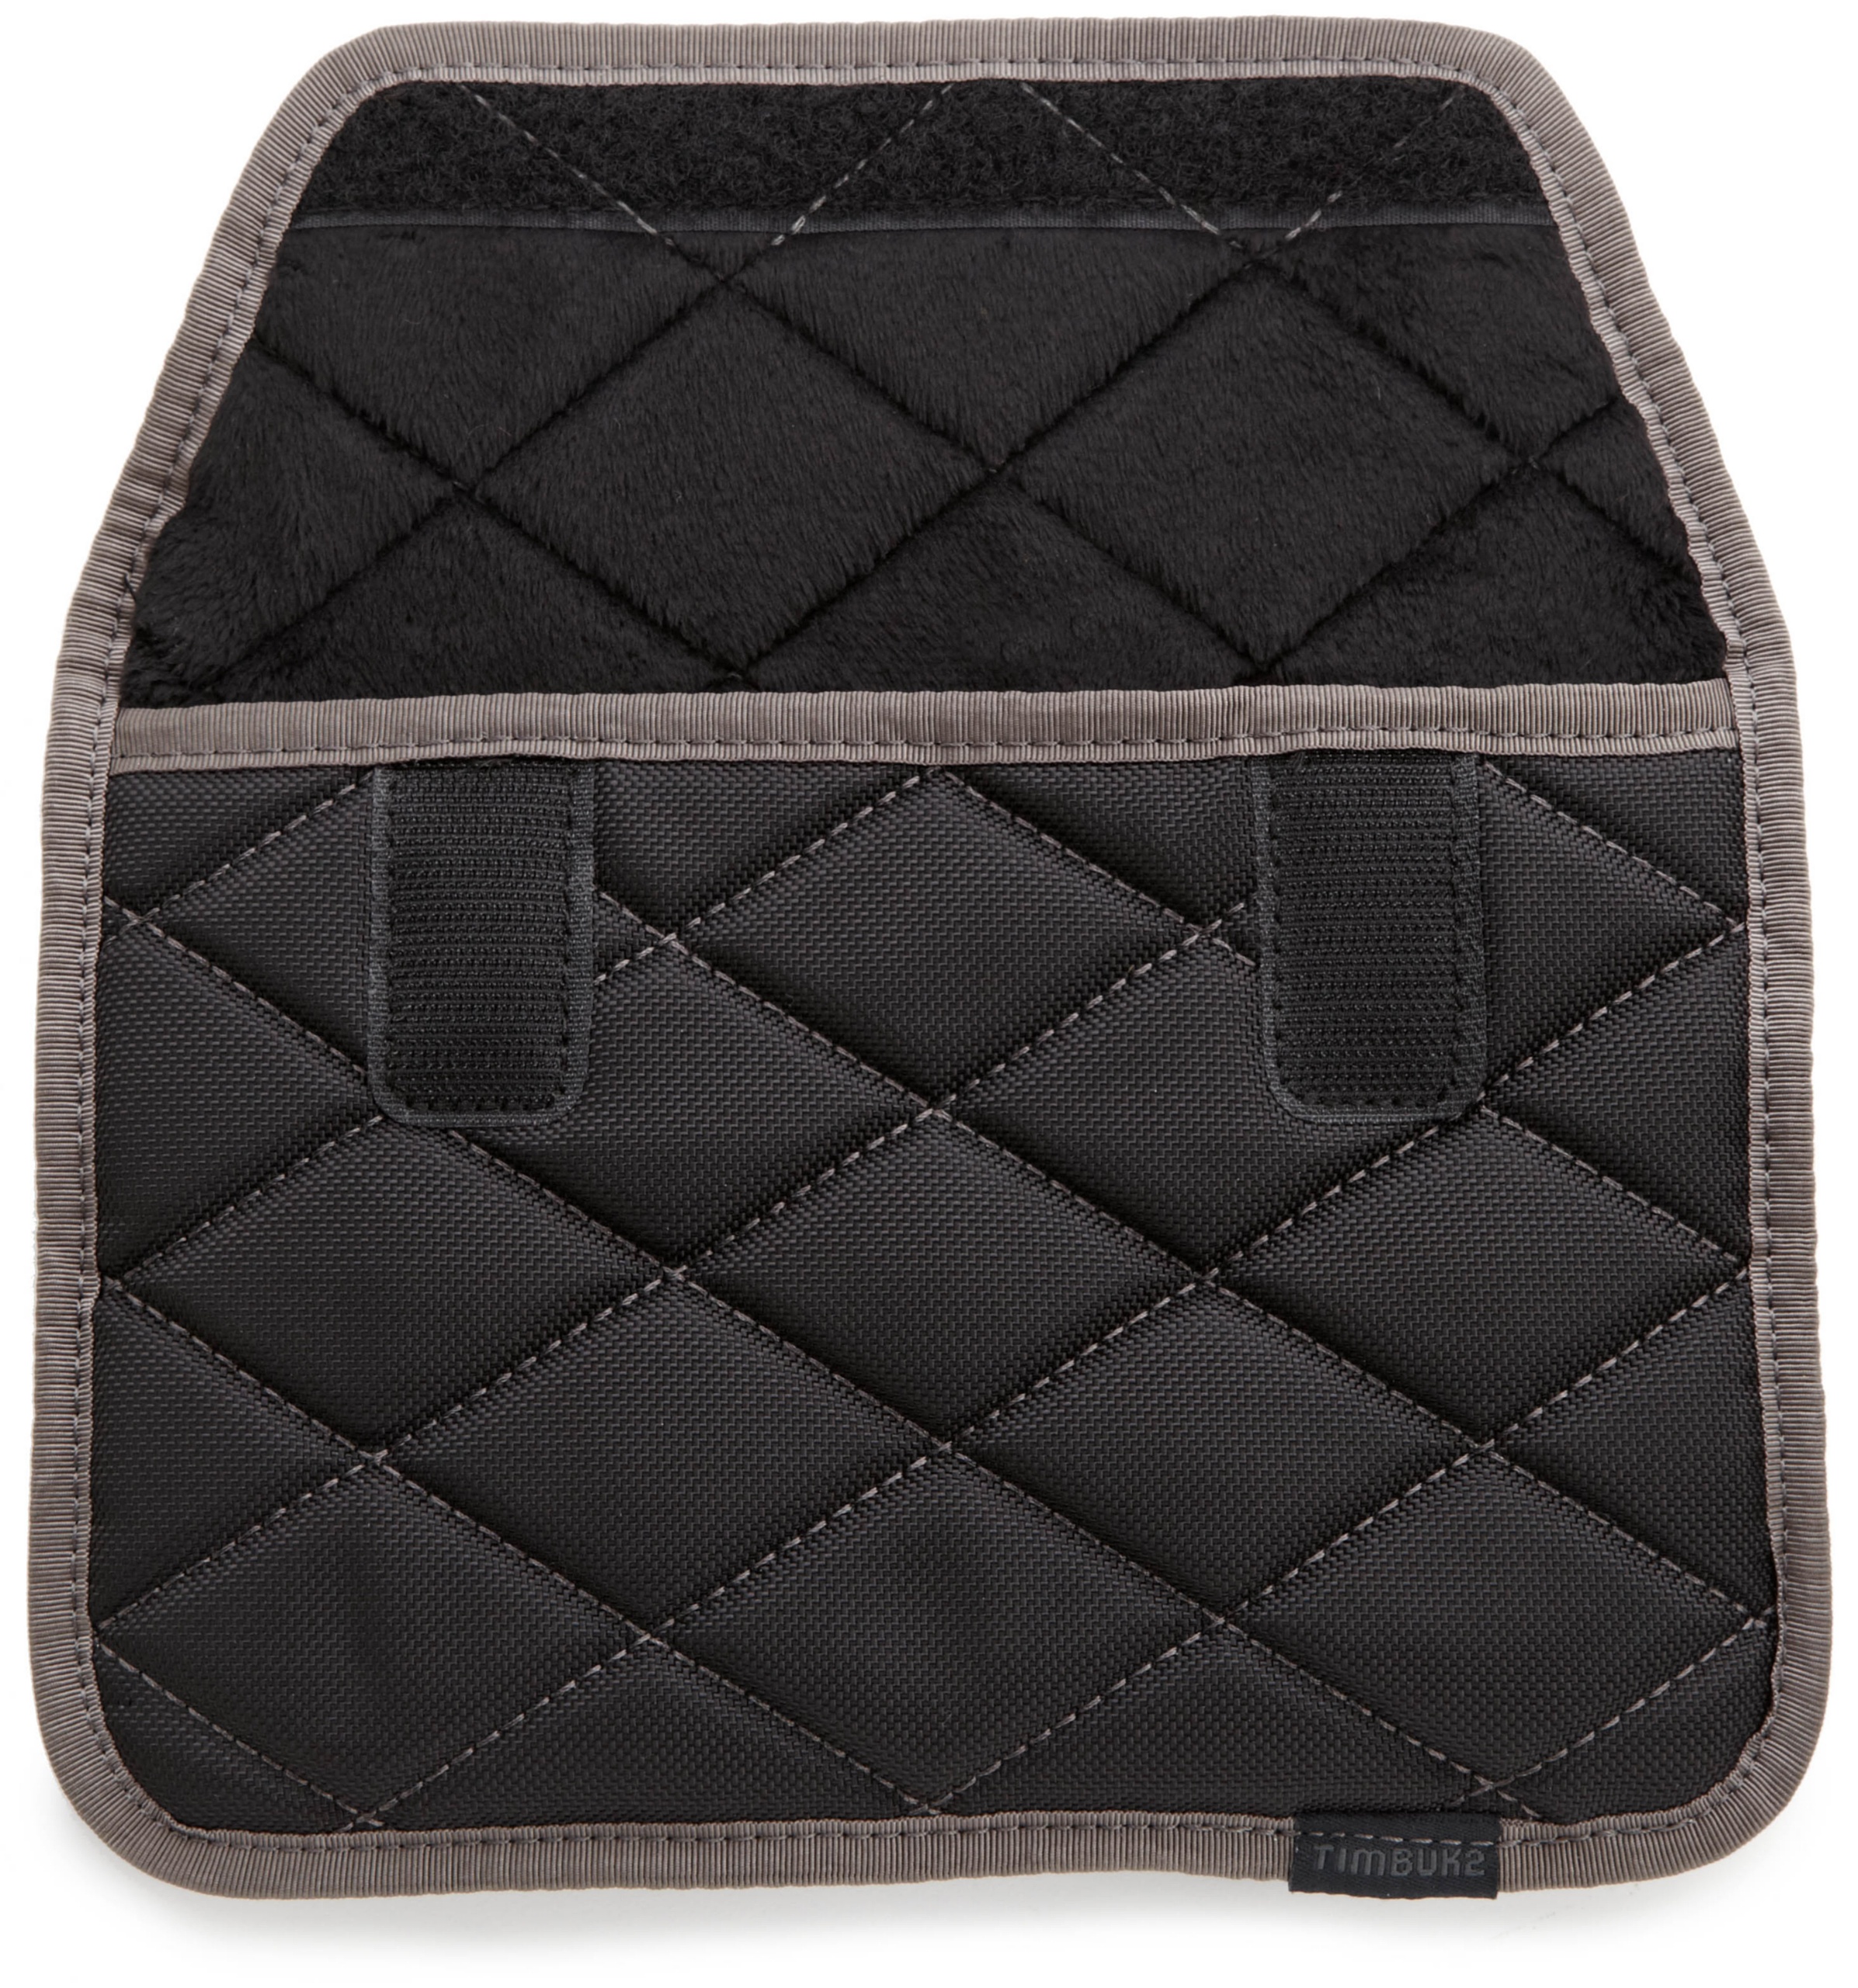 Timbuk2 Kindle Plush Sleeve with Memory Foam for impact absorption, Black/Grey (fits Kindle Paperwhite, Kindle, and Kindle Touch)